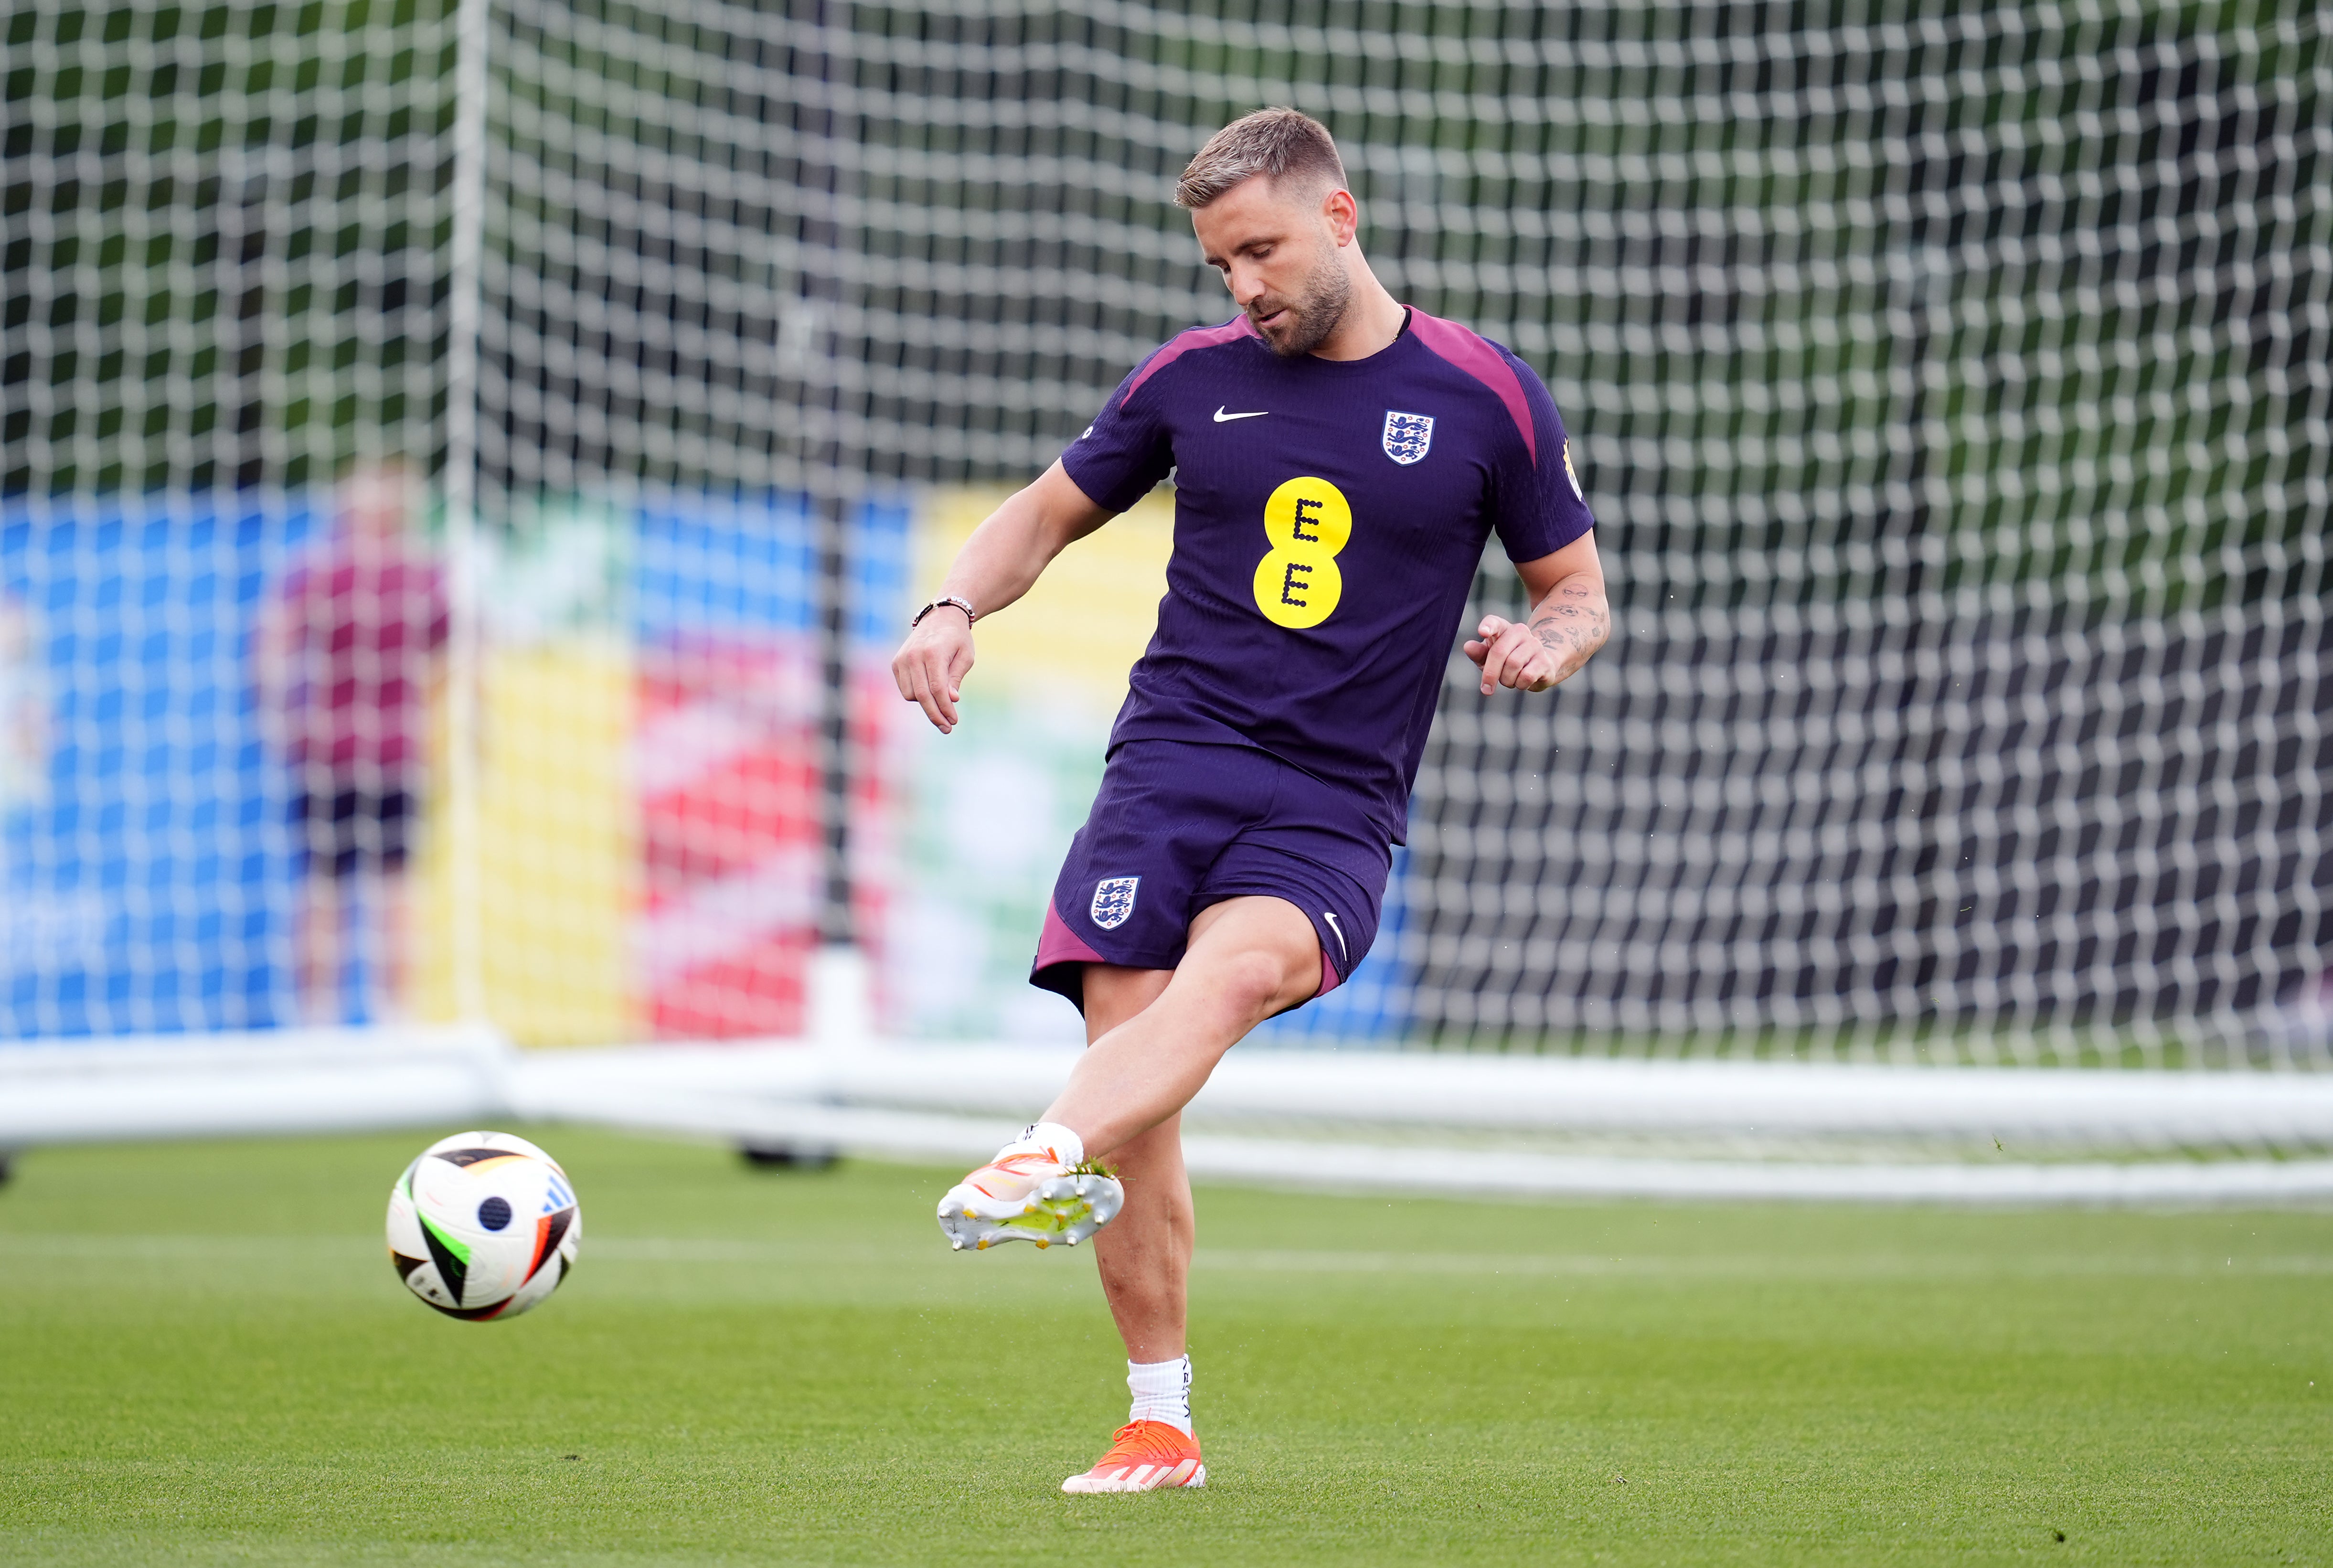 England’s Luke Shaw during a training session at the Spa & Golf Resort Weimarer Land in Blankenhain. (Adam Davy/PA)